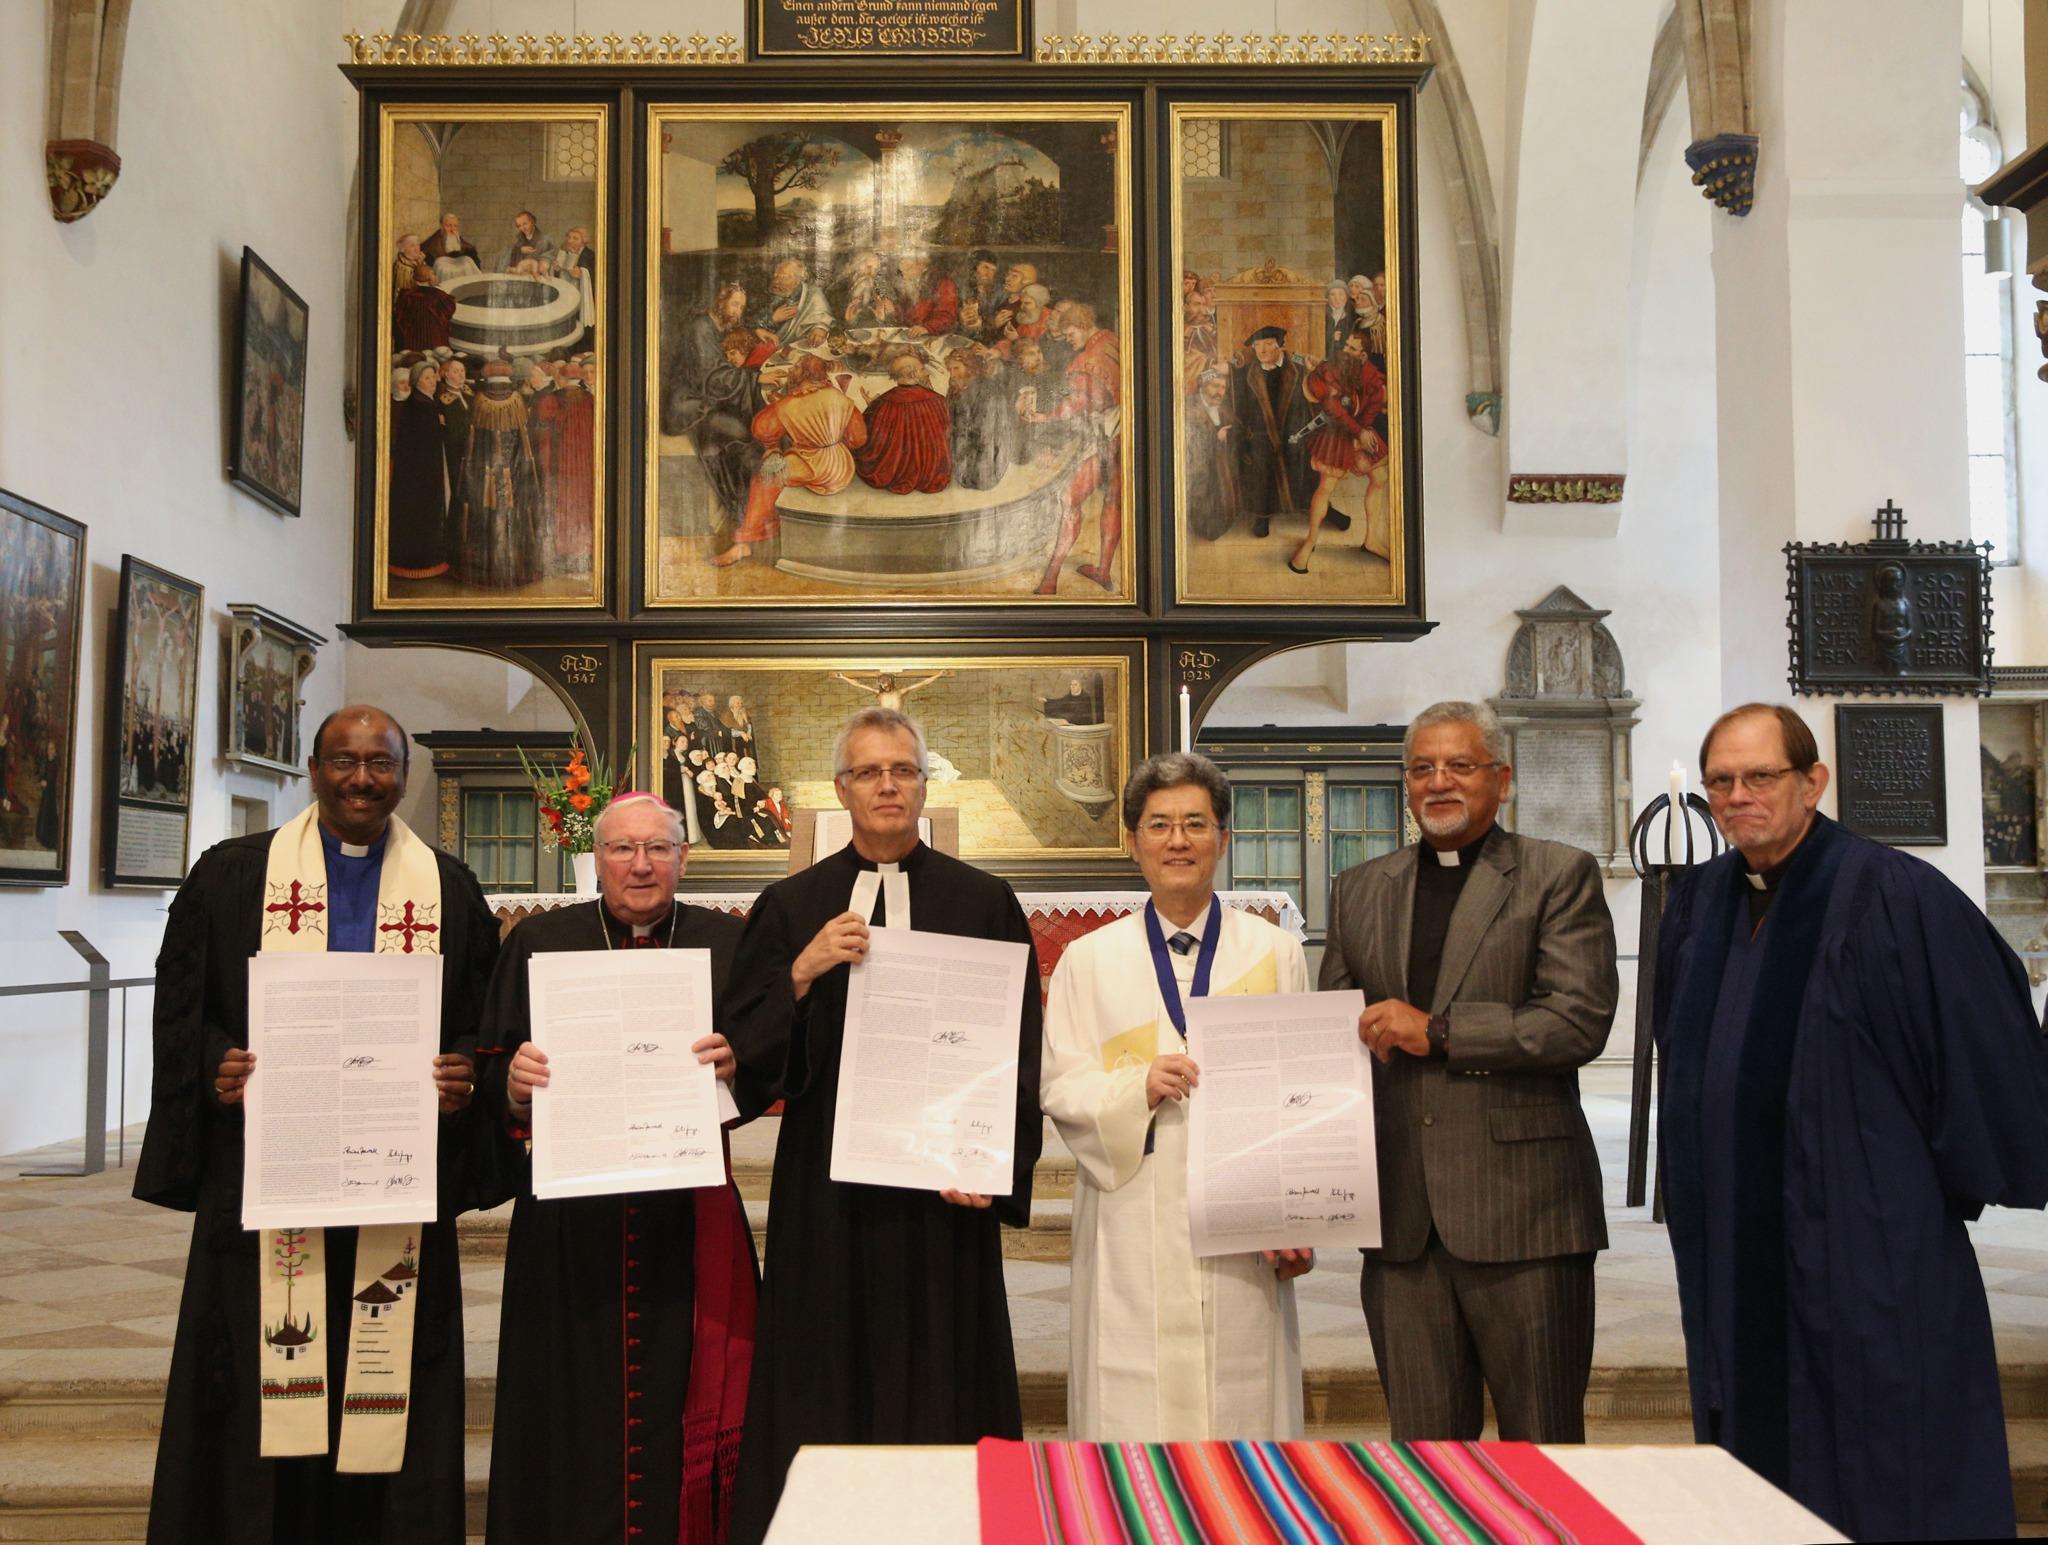 From left: President of the WCRC Jerry Pillay, Secretary of the Pontifical Council for Promoting Christian Unity Bishop Brian Farrell, LWF General Secretary Martin Junge, WMC President Jong Chun Park, WMC General Secretary Bishop Ivan Abrahams and WCRC General Secretary Chris Ferguson. Photo: WCRC / Anna Siggelkow